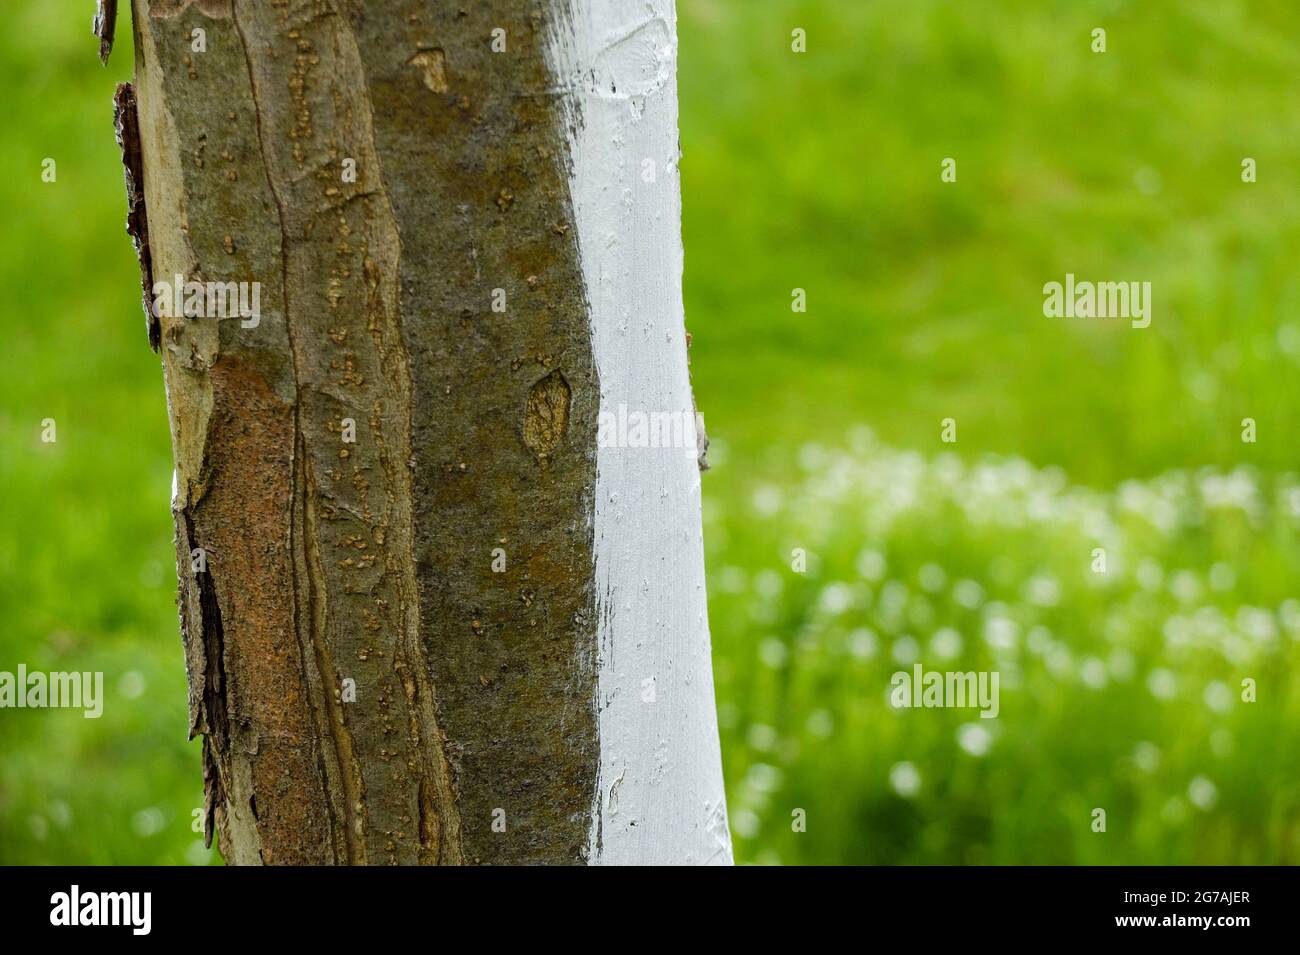 Apple tree (Malus domestica) coated with lime Stock Photo